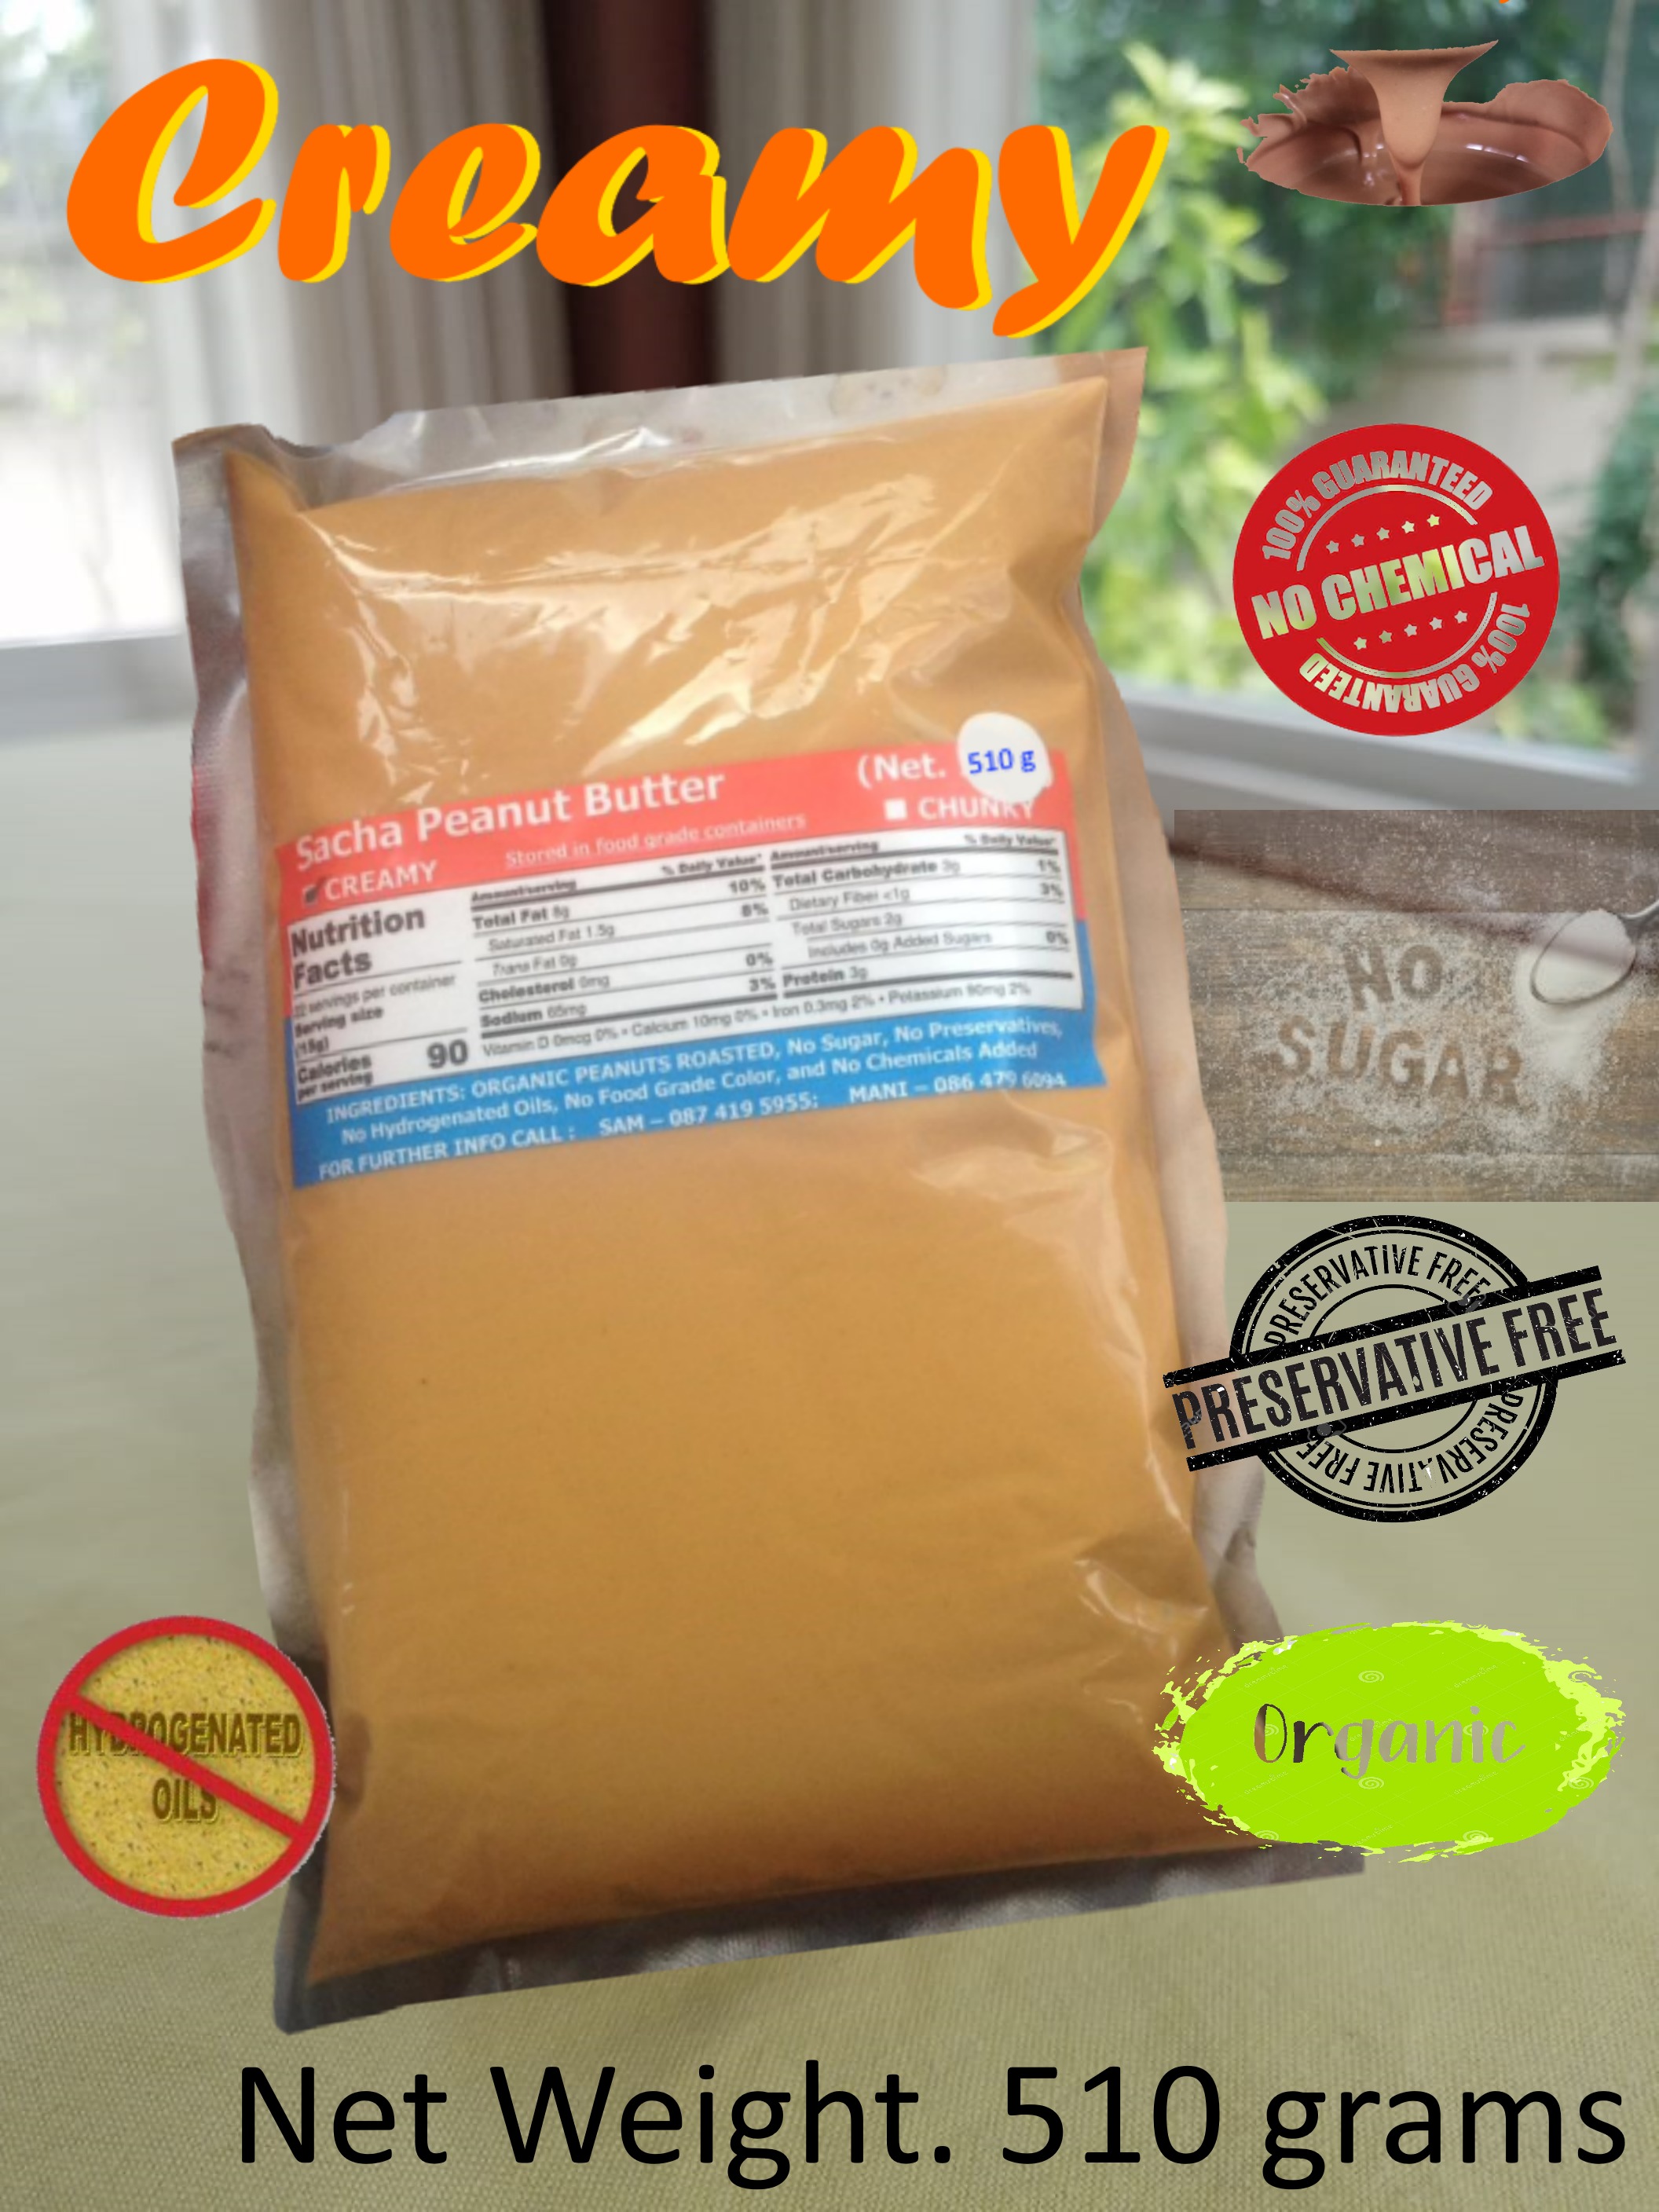 Sacha Peanut Butter (Creamy) All Natural Organic (510 grams) - Free Delivery, ซาช่า-เนยถั่ว (ส่งฟรี)